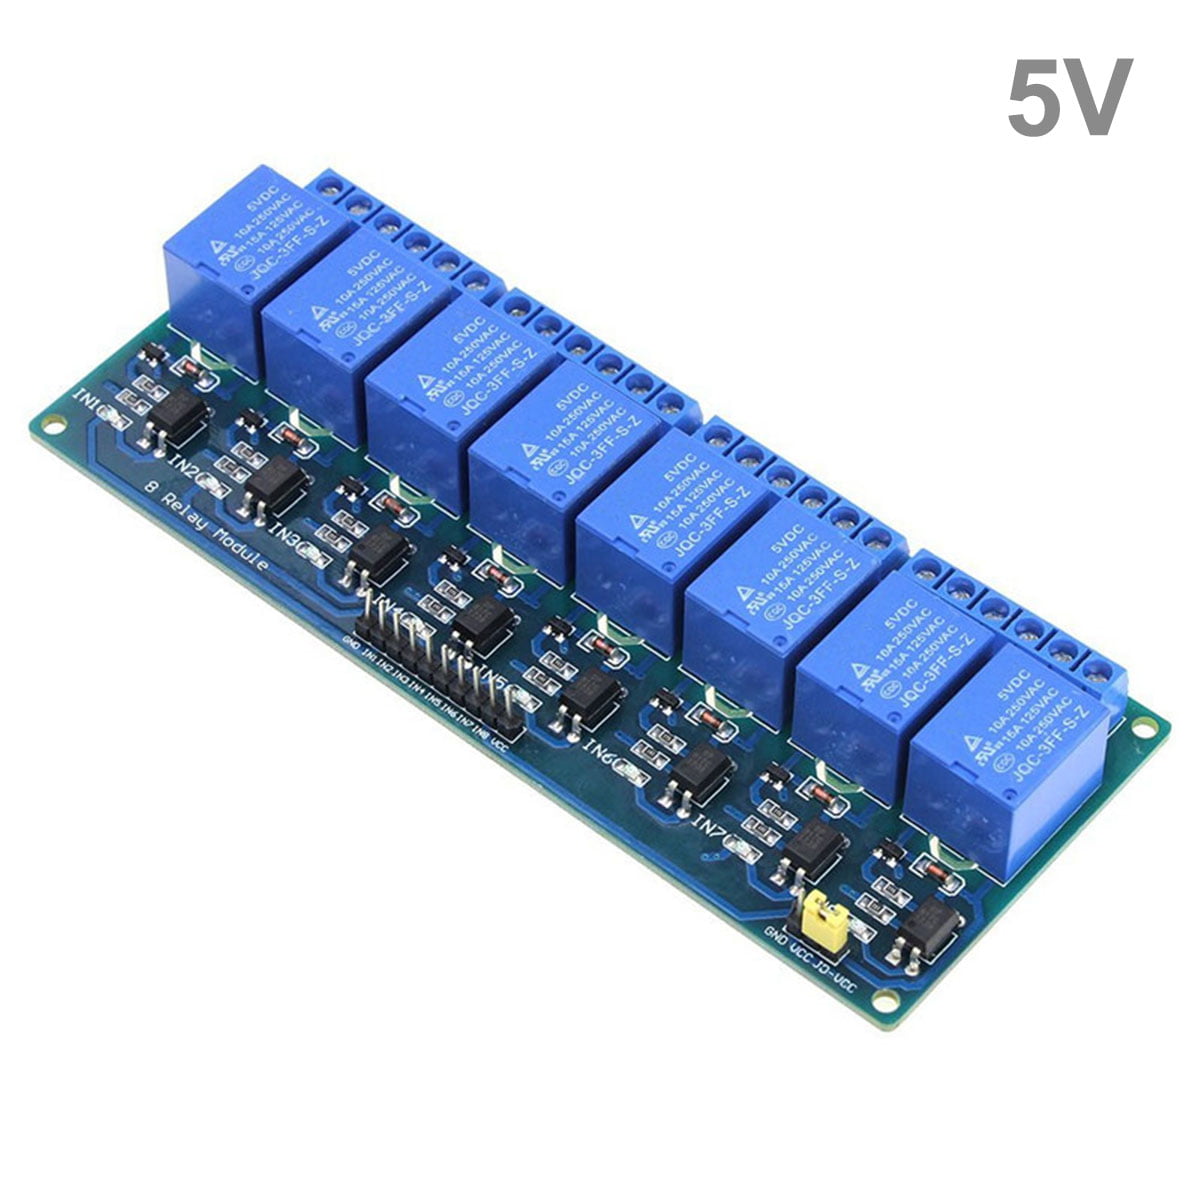 5V 1 Channel Relay Board Module Optocoupler LED For Arduino PIC ARM AVR wh 